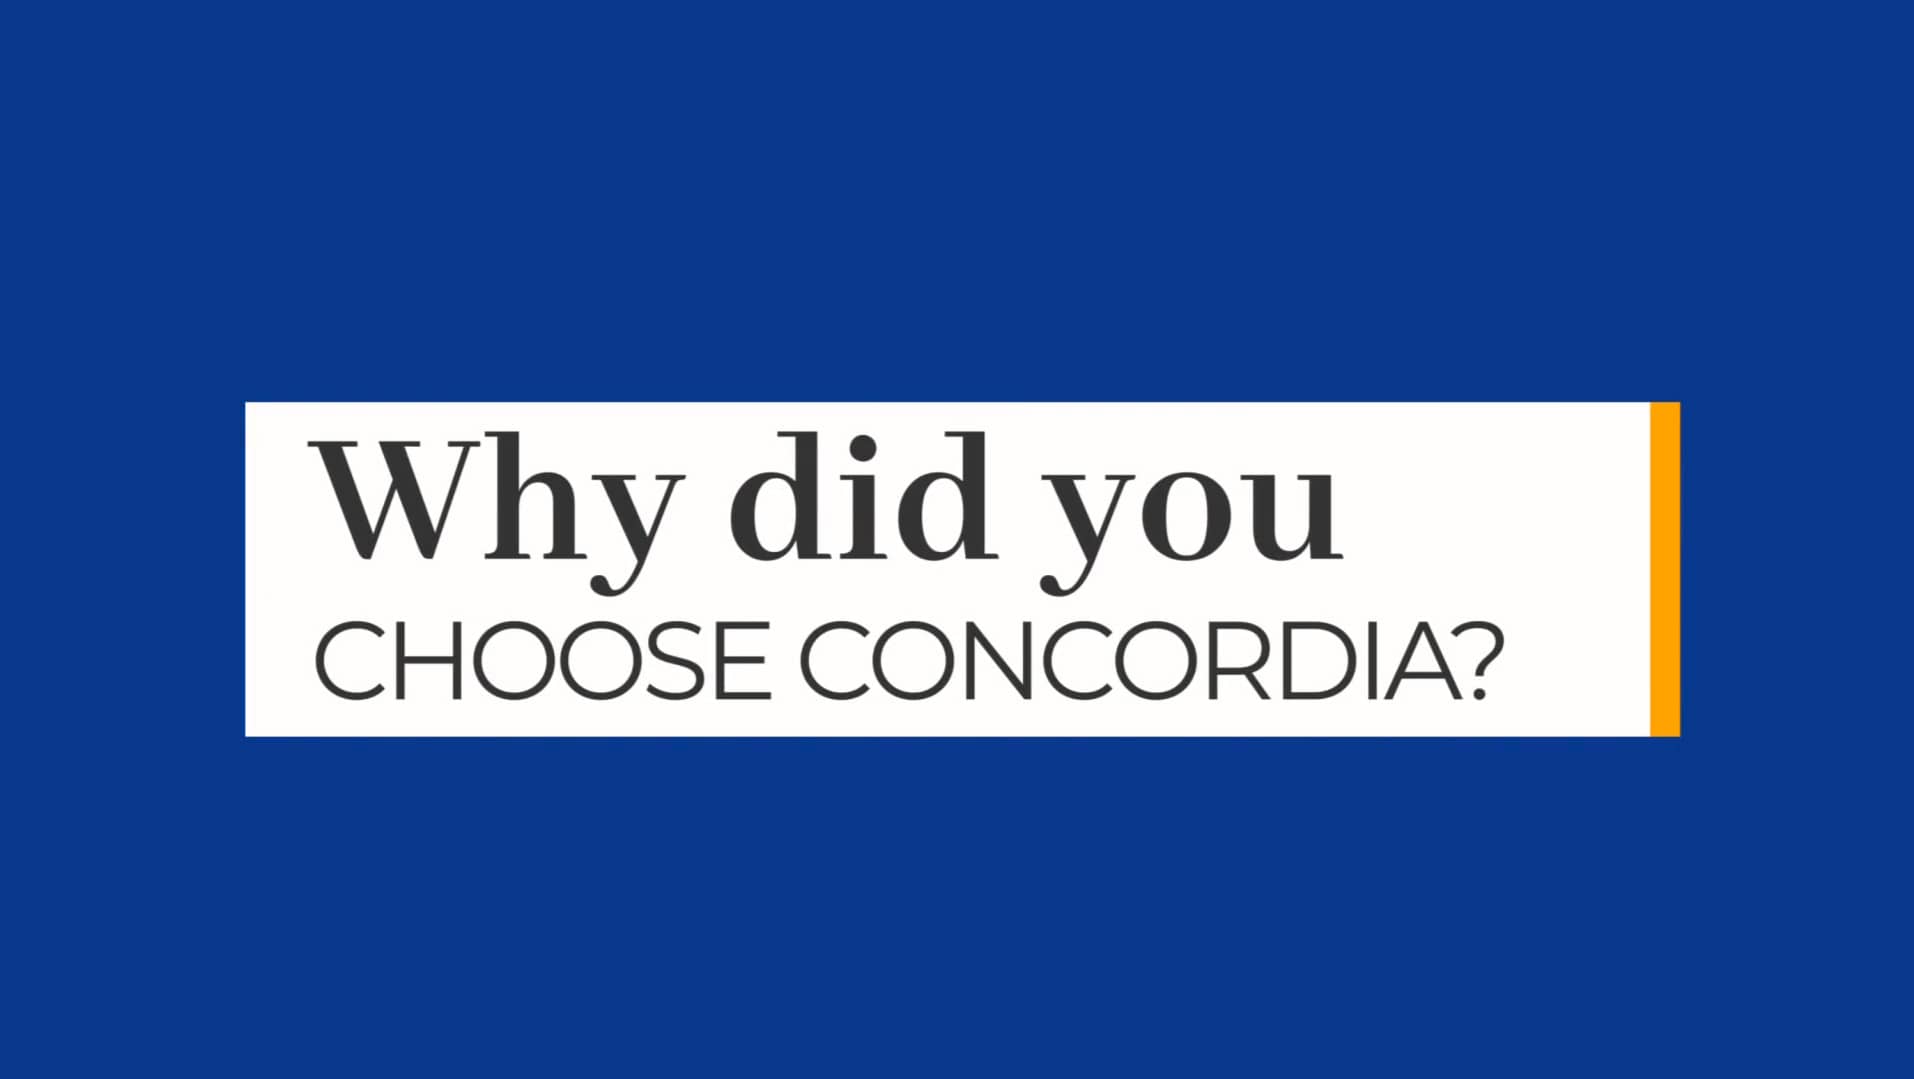 Why Choose Concordia video cover 2021